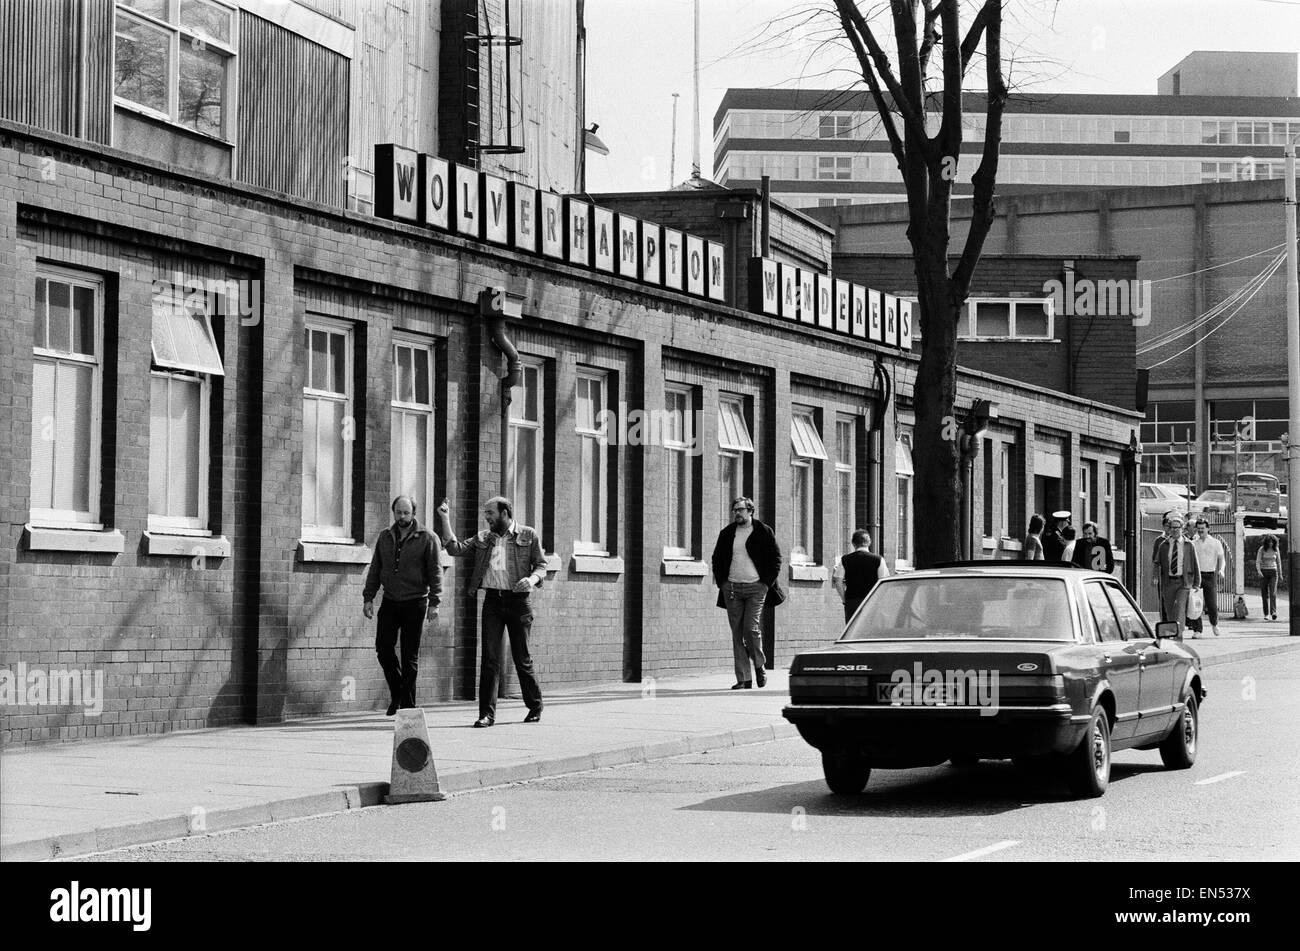 English Div 1 (old) Wolverhampton Wanderers 0 v. Ipswich Town 3. Exterior view of the Molineux Ground at Wolverhampton. 21st April 1984 Stock Photo